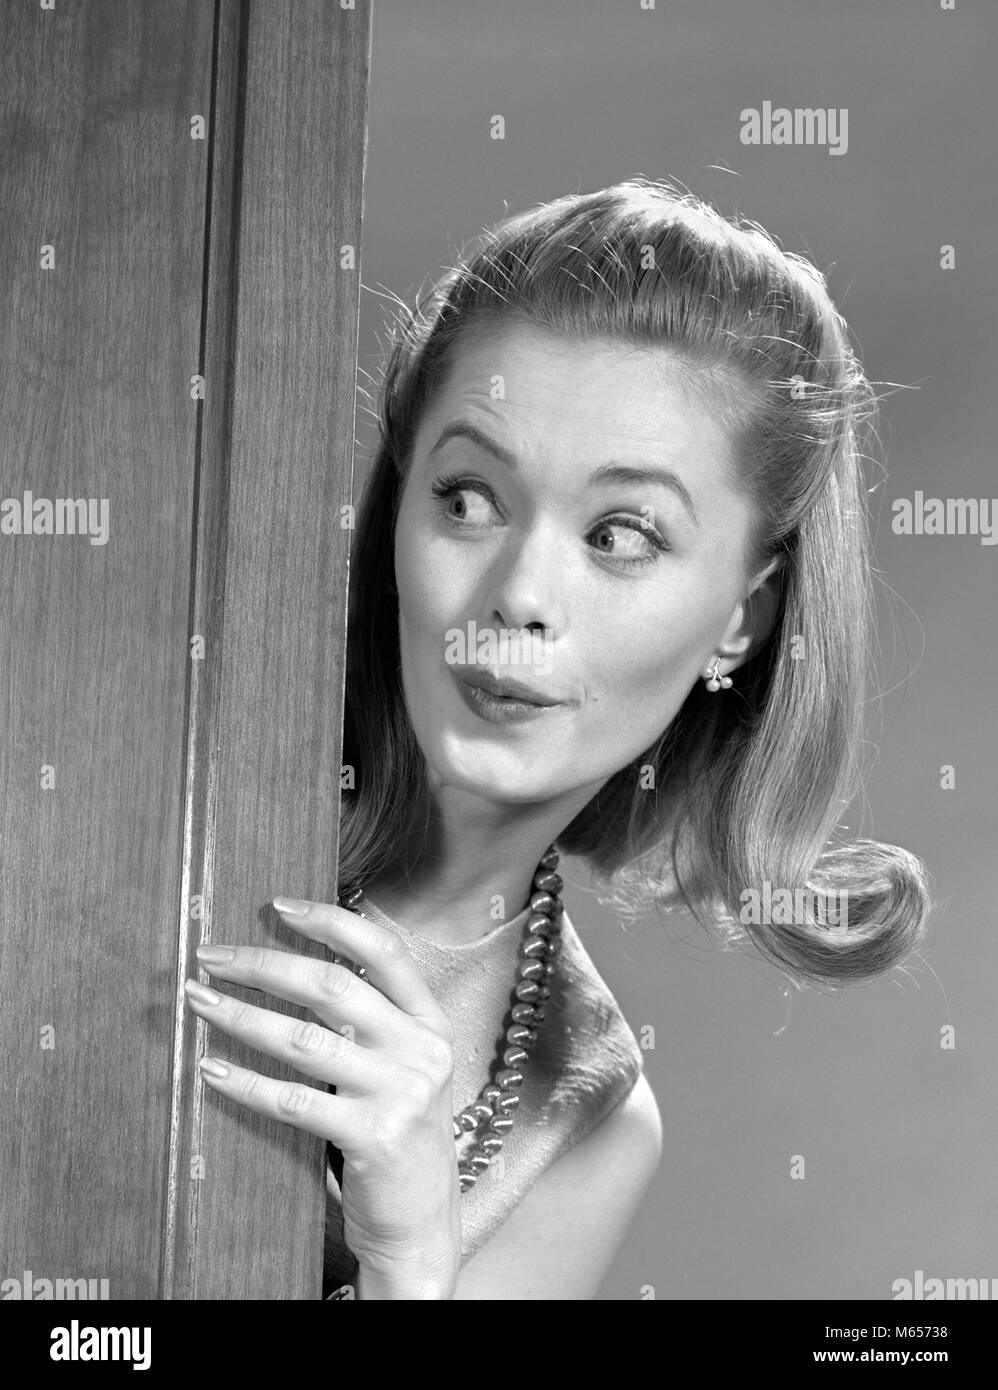 1960s WOMAN PEEKING AROUND DOOR WITH FUNNY FACIAL EXPRESSION - g6952 HAR001 HARS LIFESTYLE FLIP FEMALES STUDIO SHOT GROWNUP ONE PERSON ONLY HOME LIFE COPY SPACE LADIES GROWN-UP INDOORS NOSTALGIA SNOOPING 20-25 YEARS 25-30 YEARS HUMOROUS HAPPINESS HEAD AND SHOULDERS DISCOVERY HAIRSTYLE KNOWLEDGE OPPORTUNITY VOYEUR SPYING SNOOP EAVESDROPPING MID-ADULT MID-ADULT WOMAN PEOPLE ADULTS B&W BLACK AND WHITE CAUCASIAN ETHNICITY NOSY OLD FASHIONED PERSONS Stock Photo